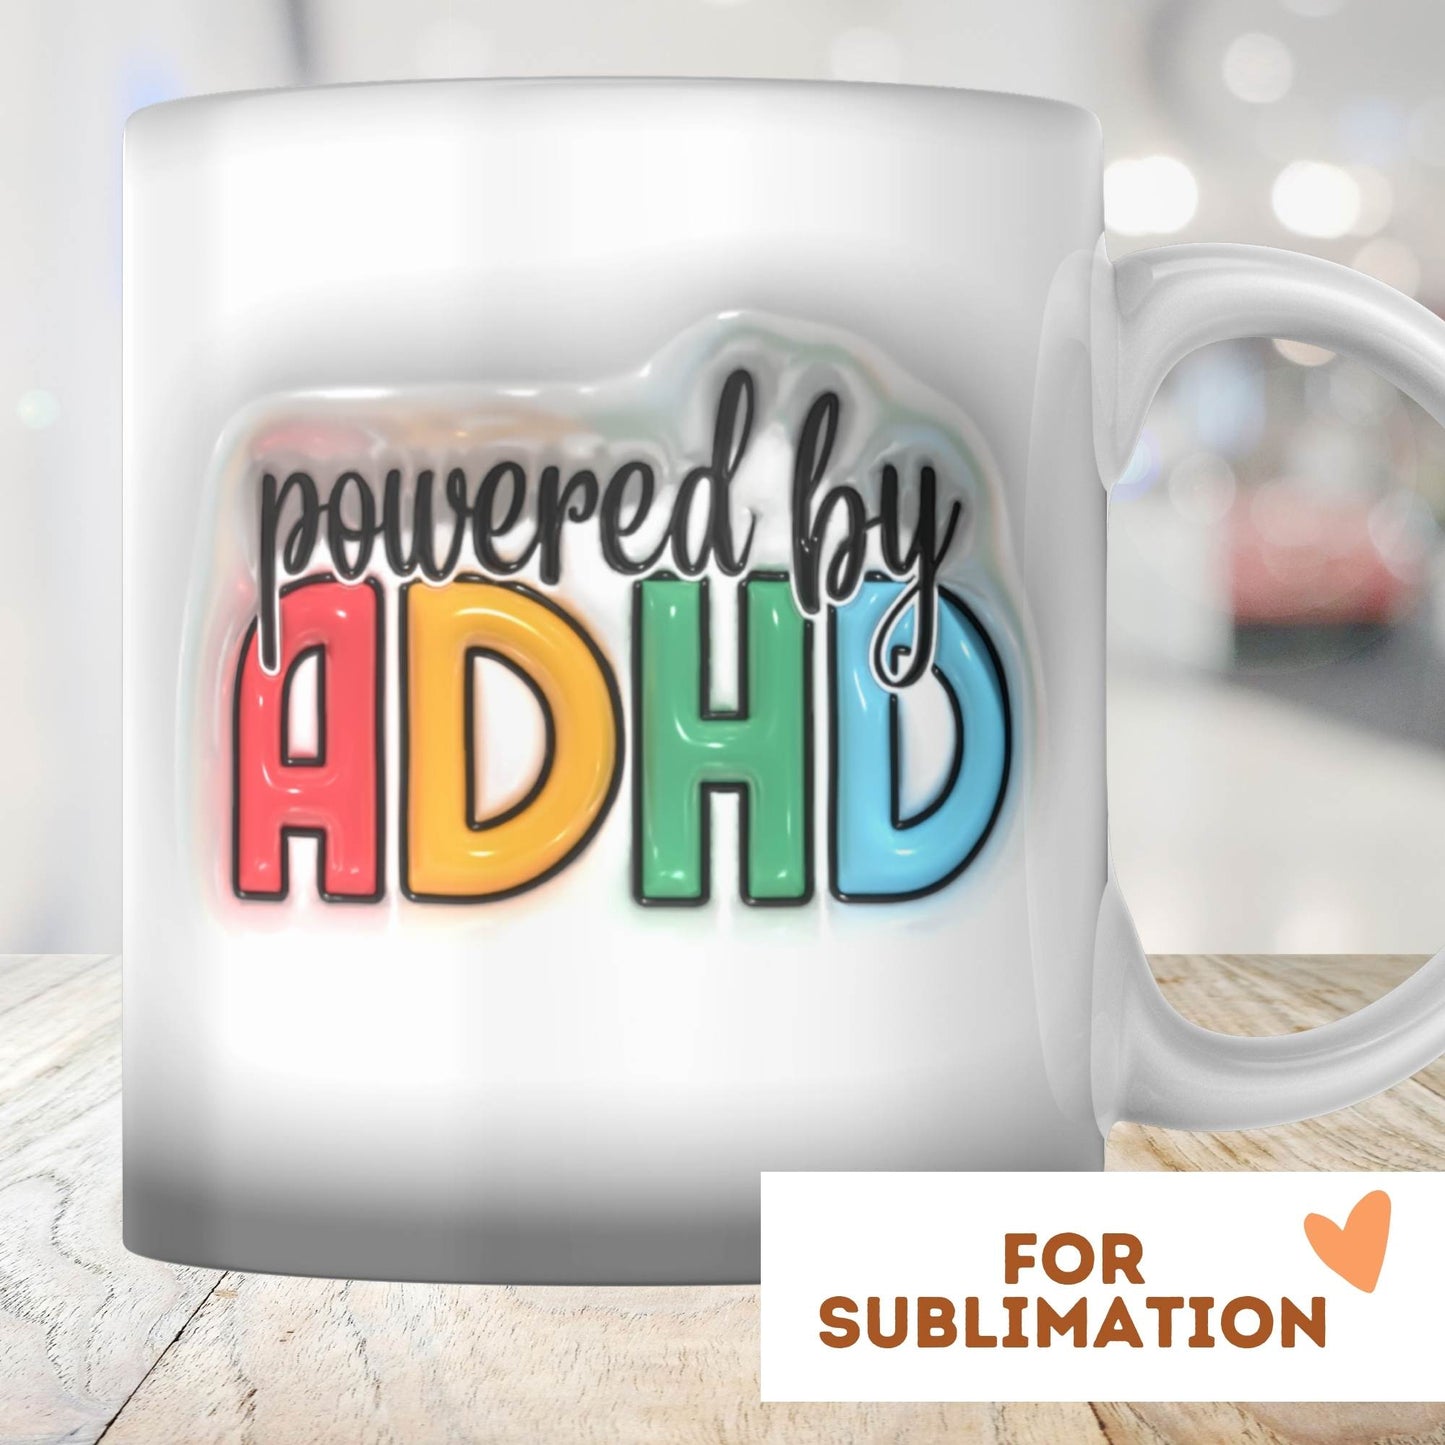 ADHD Powered by - 3D